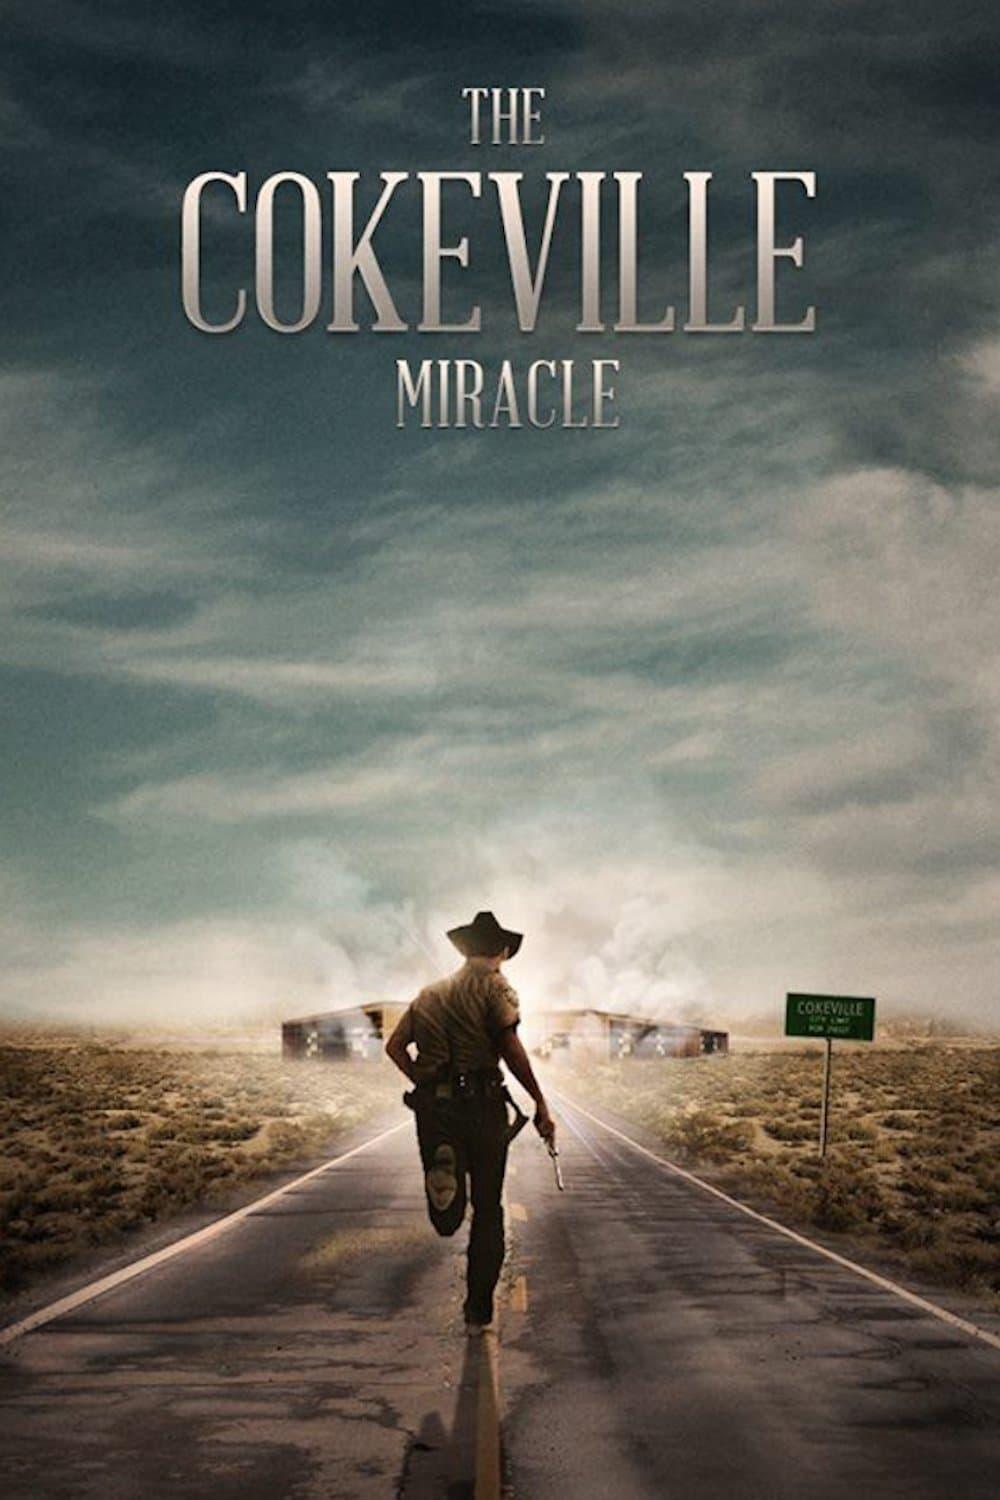 The Cokeville Miracle poster